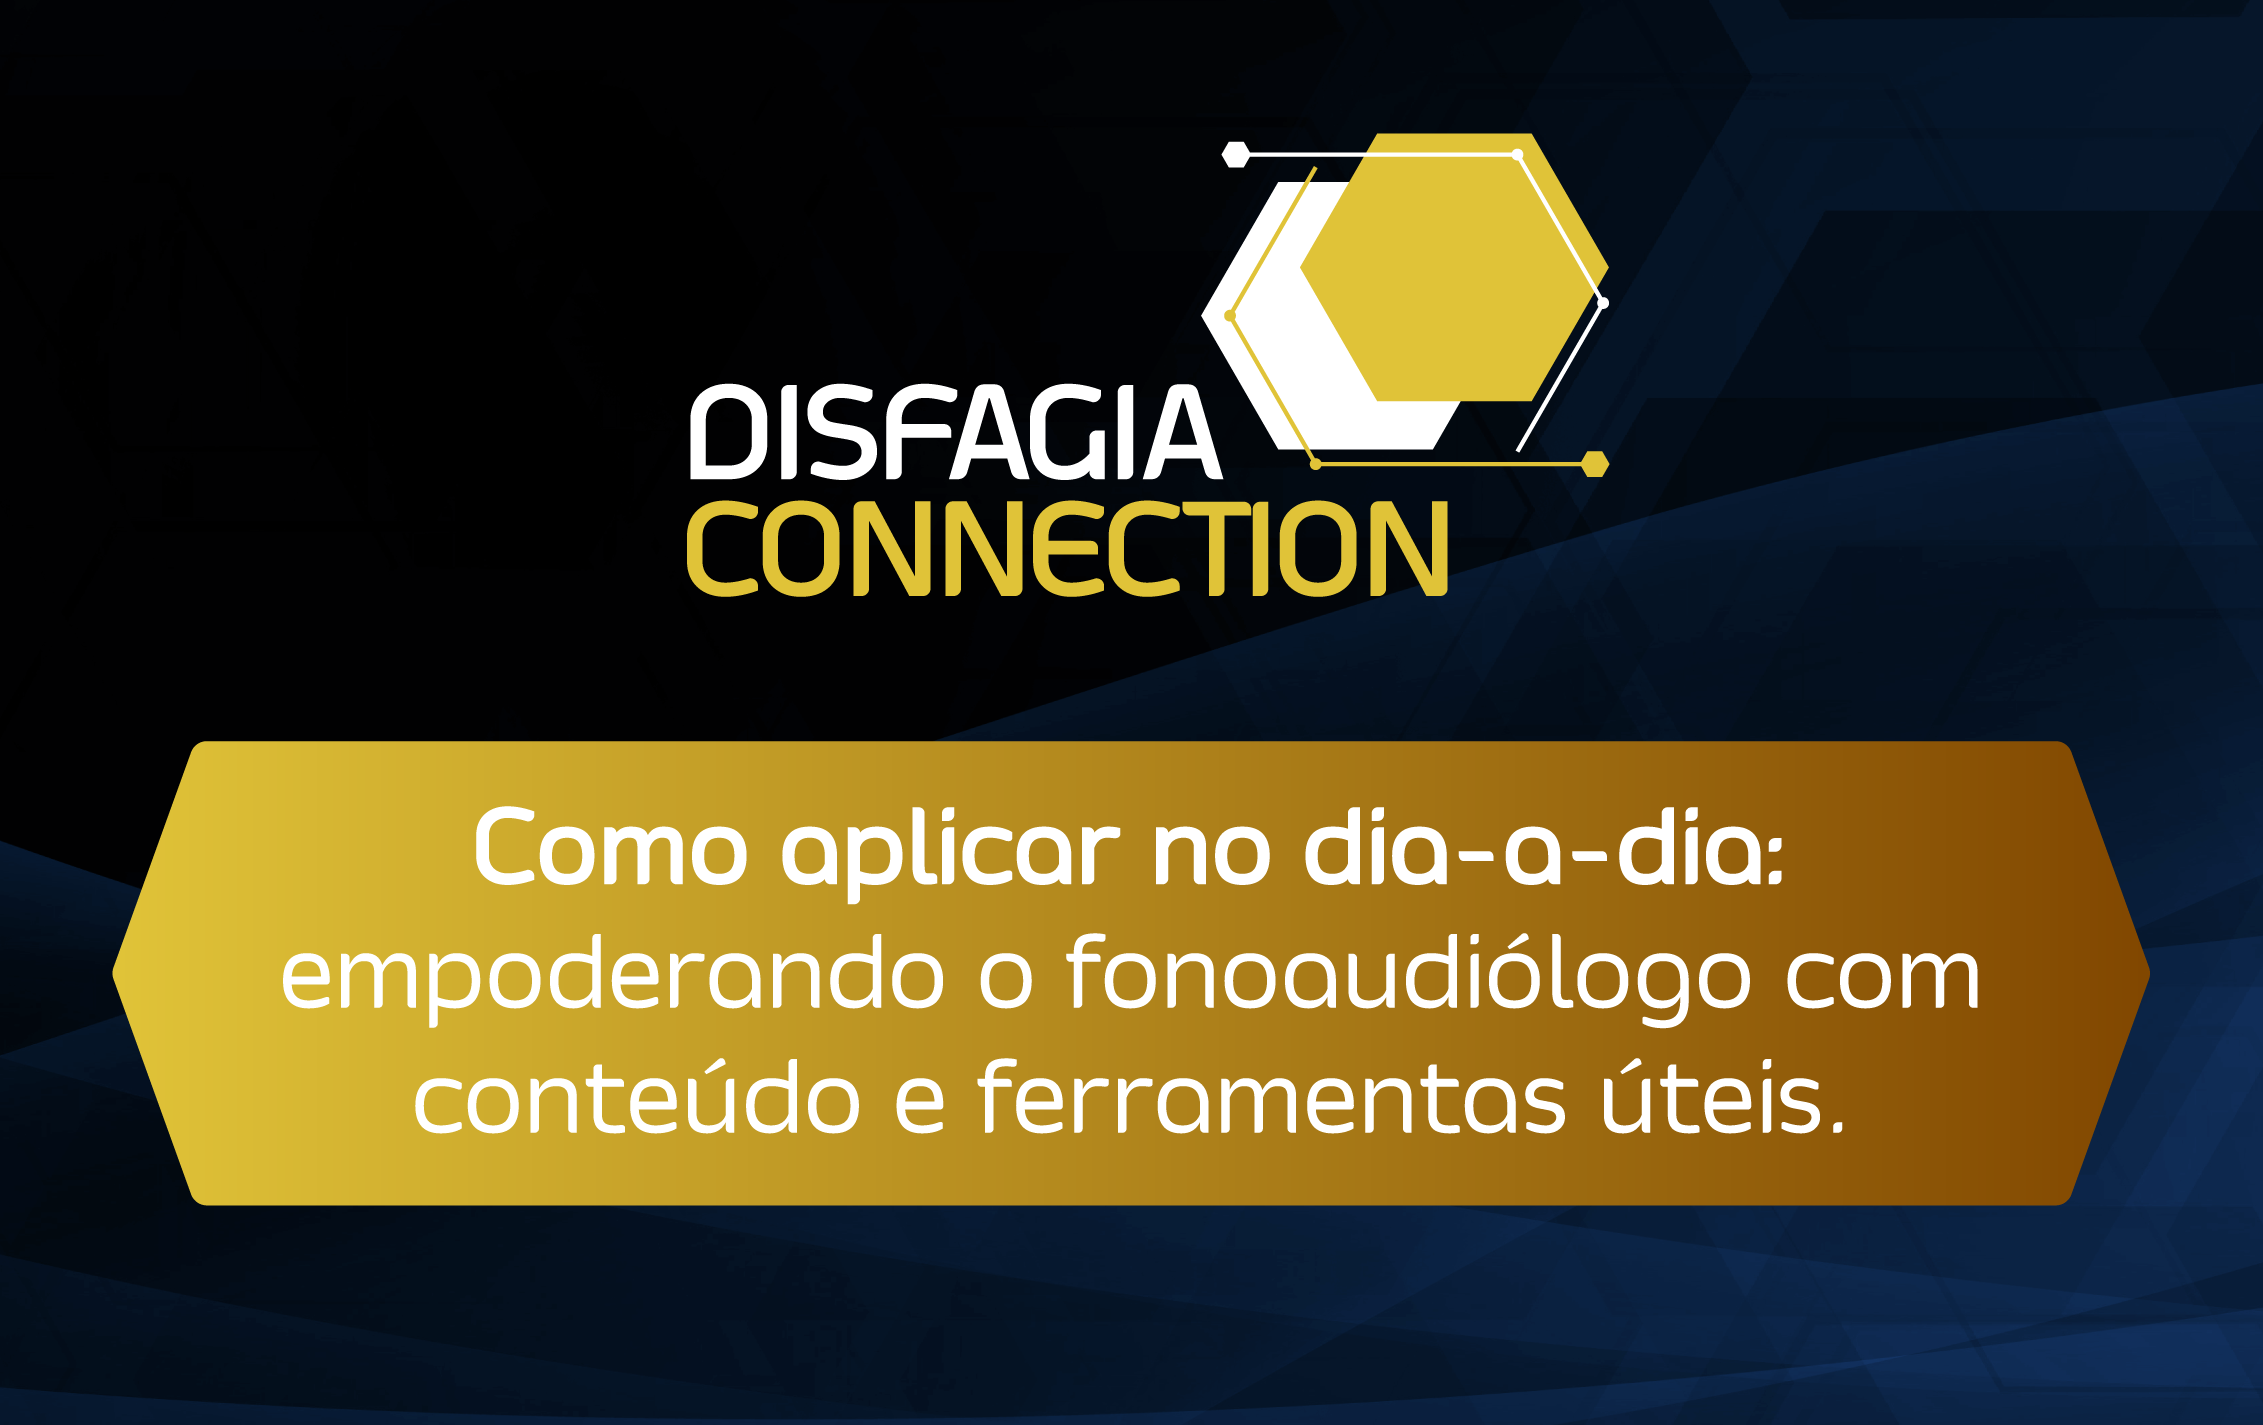 Disfagia Connection: 06/06